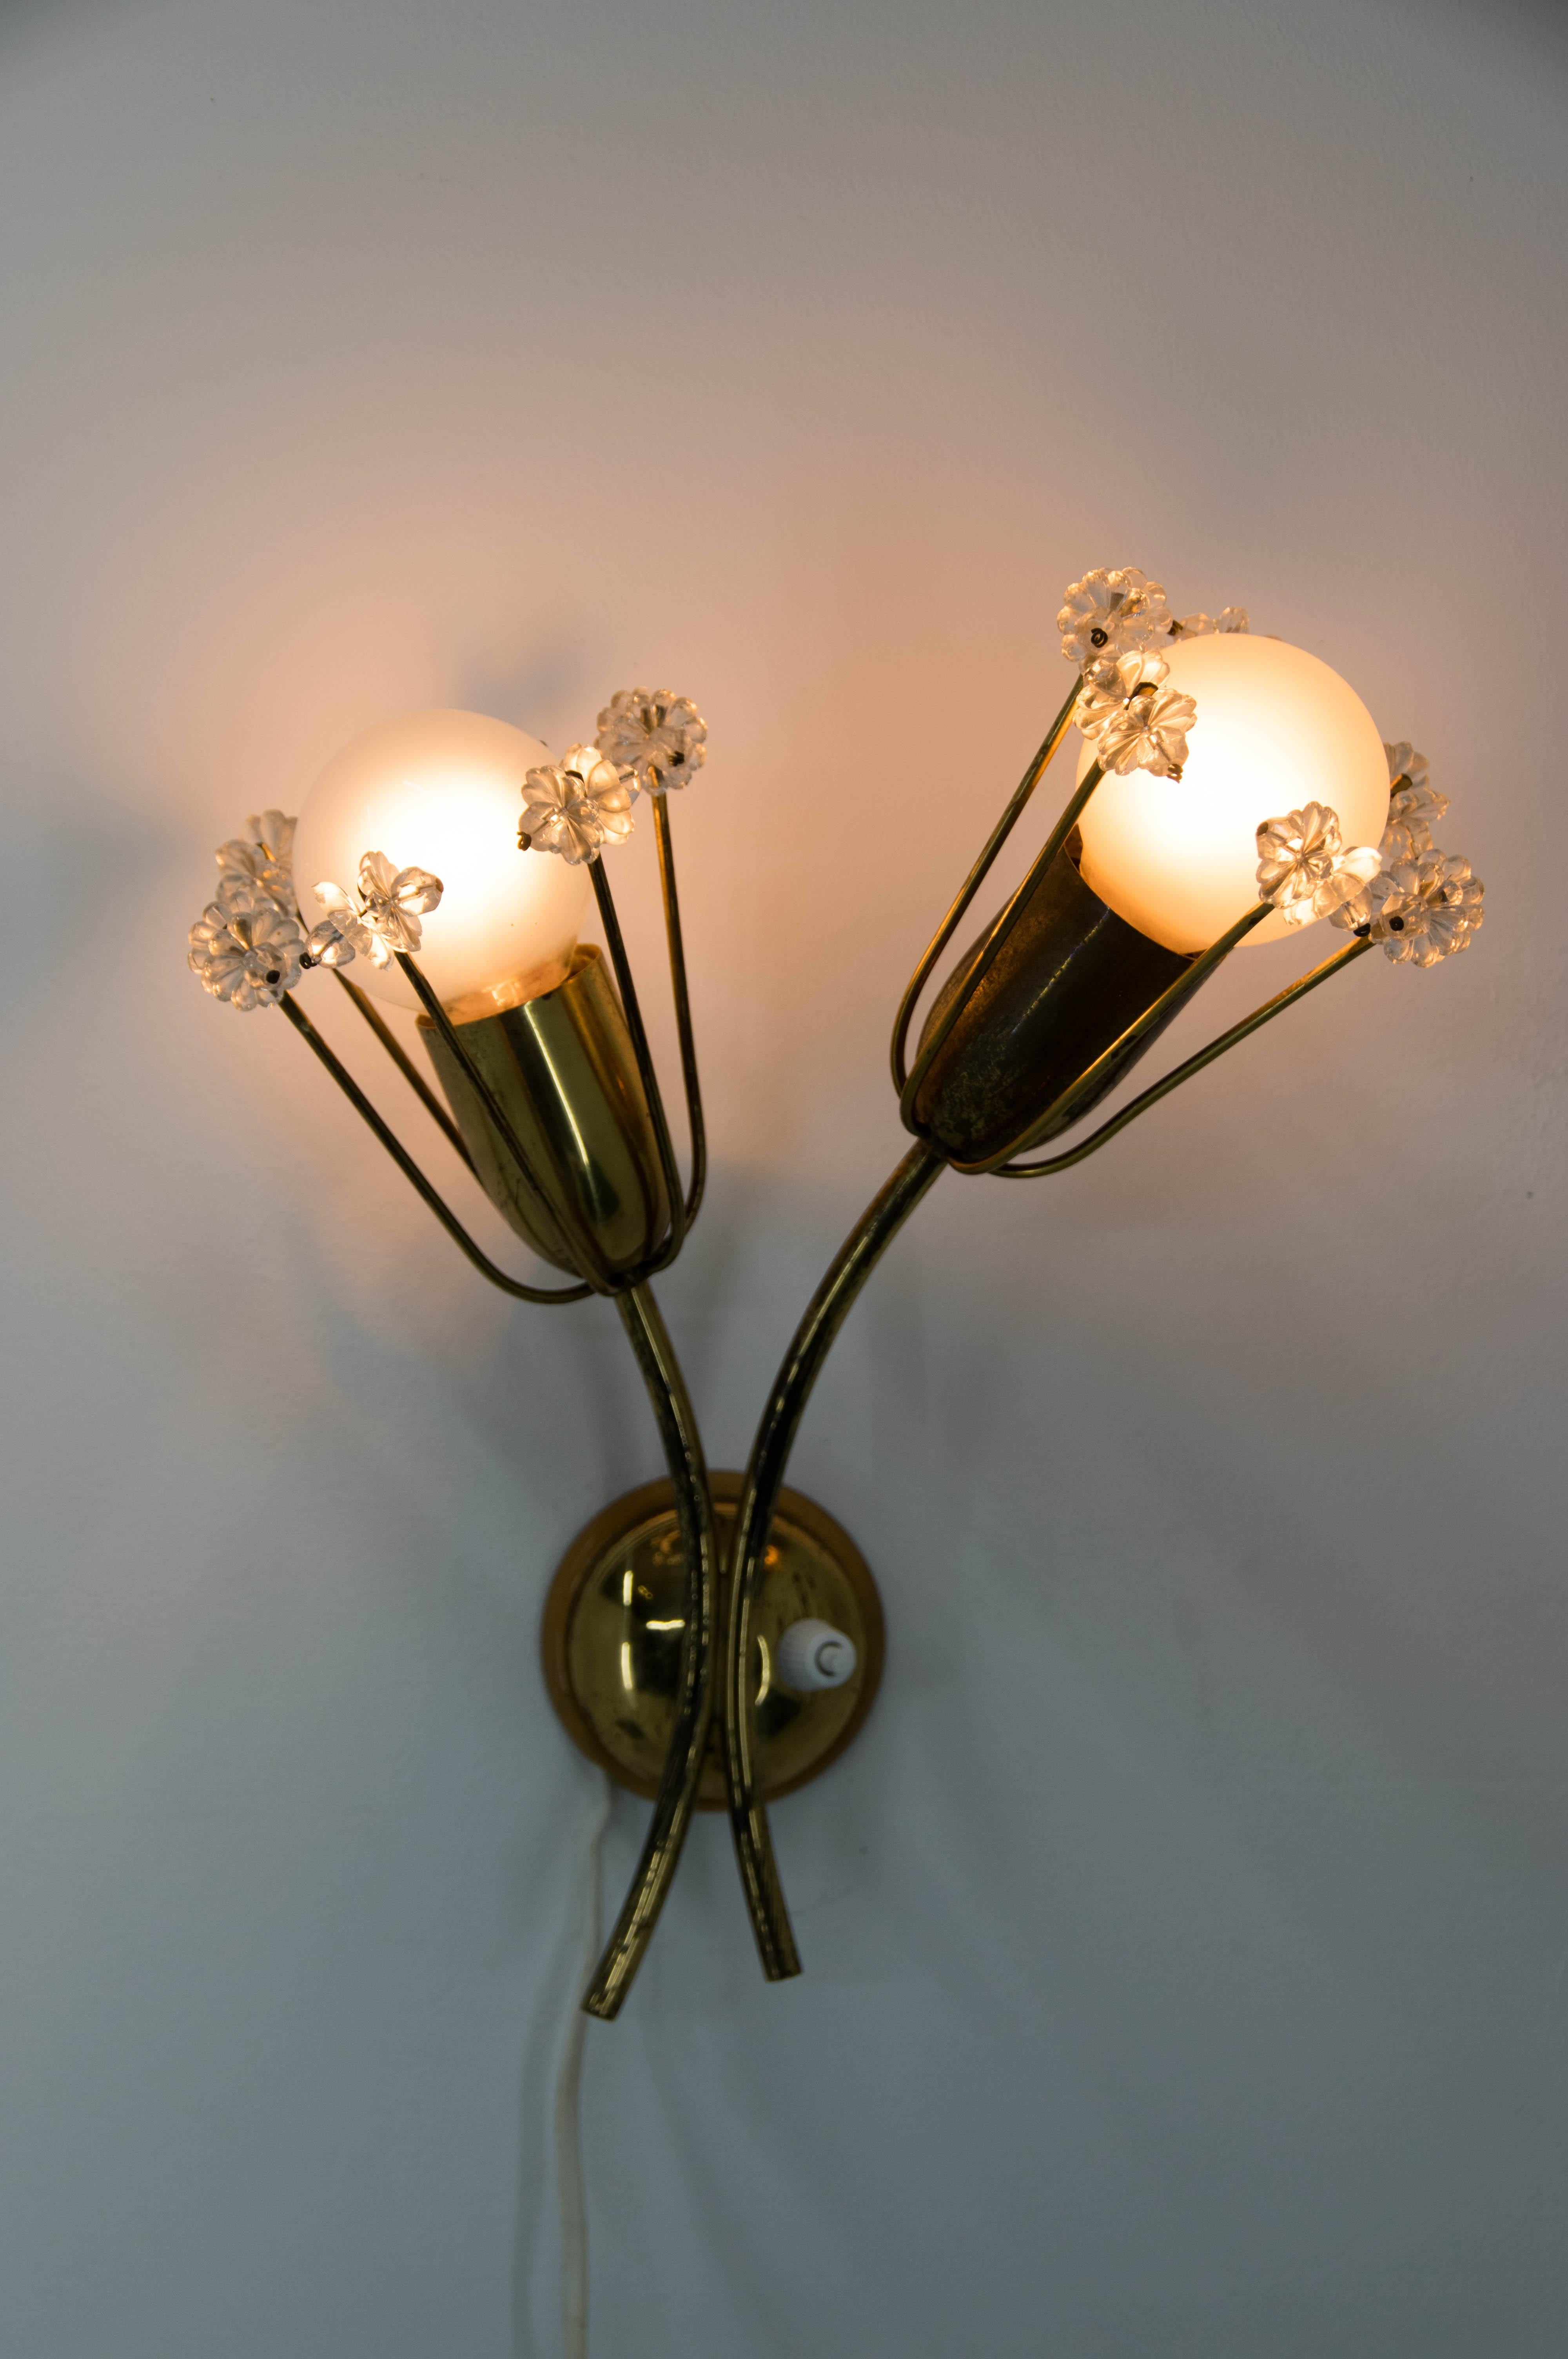 Made in Austria in 1950s.
Lacquered brass with age patina.
Crystal in perfect condition.
40W, E25-E27 bulbs.